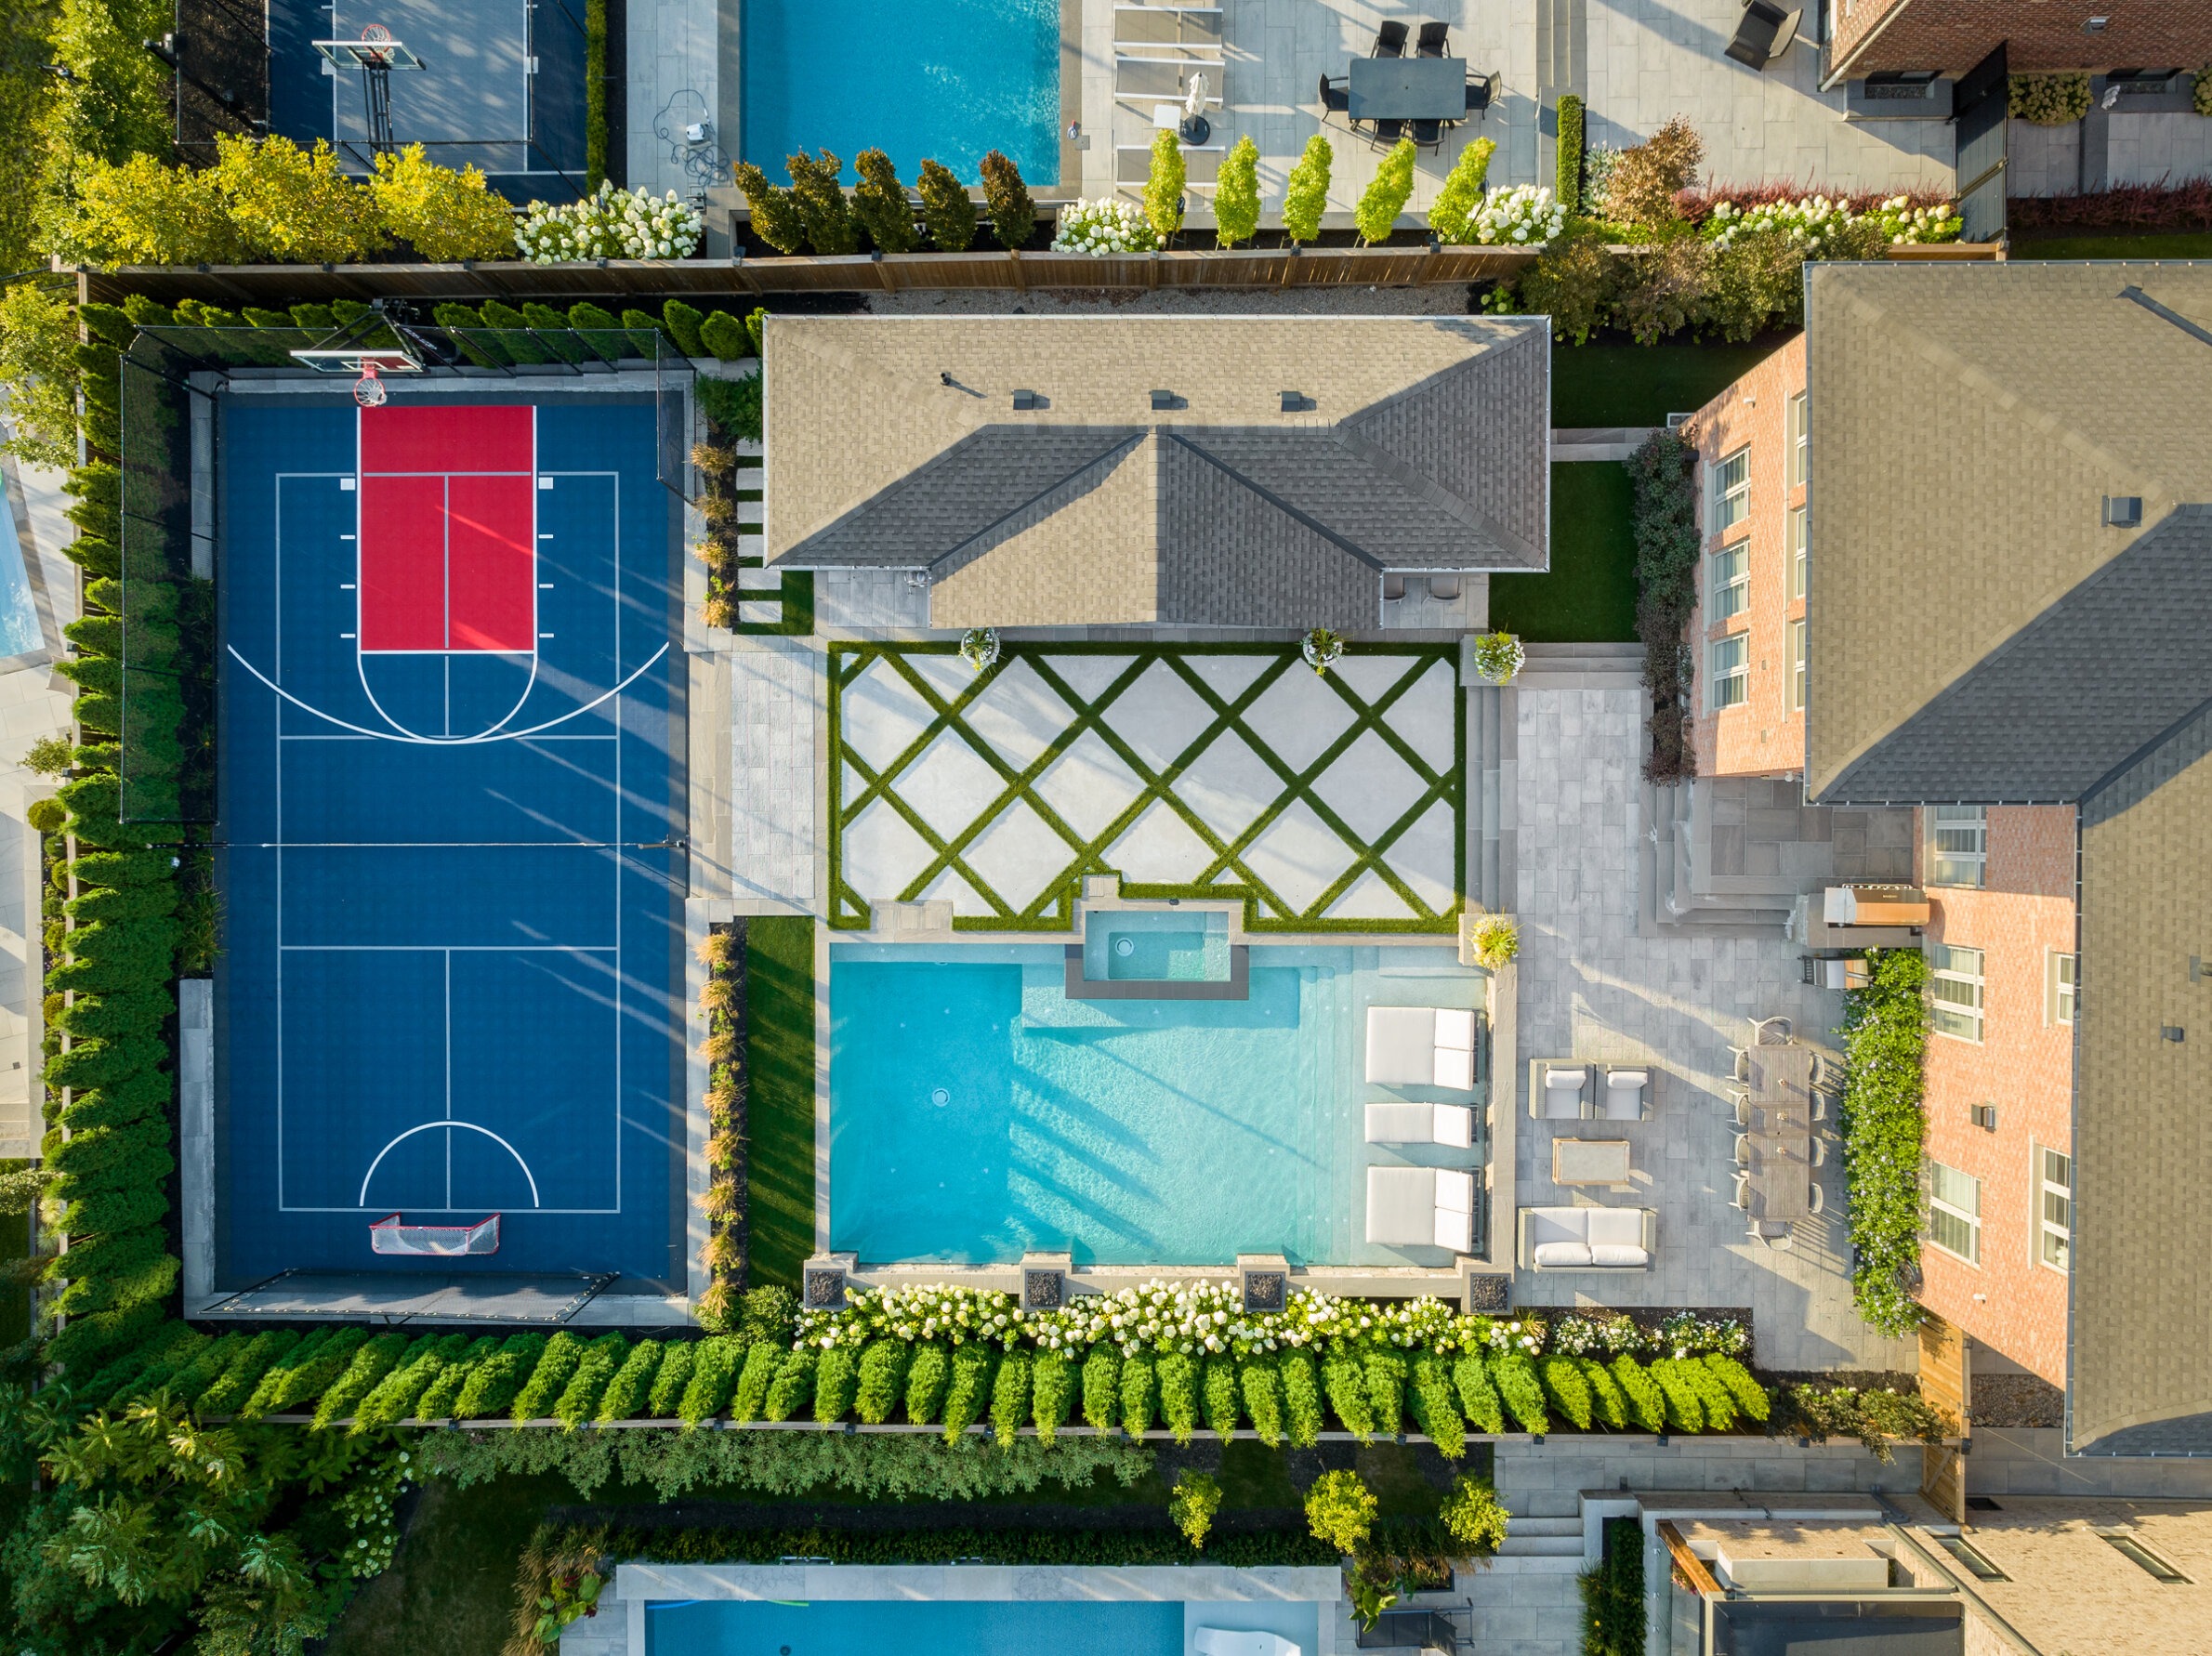 Aerial view of a luxurious backyard with a basketball court, swimming pool, landscaping, lounging chairs, and adjacent houses under clear skies.